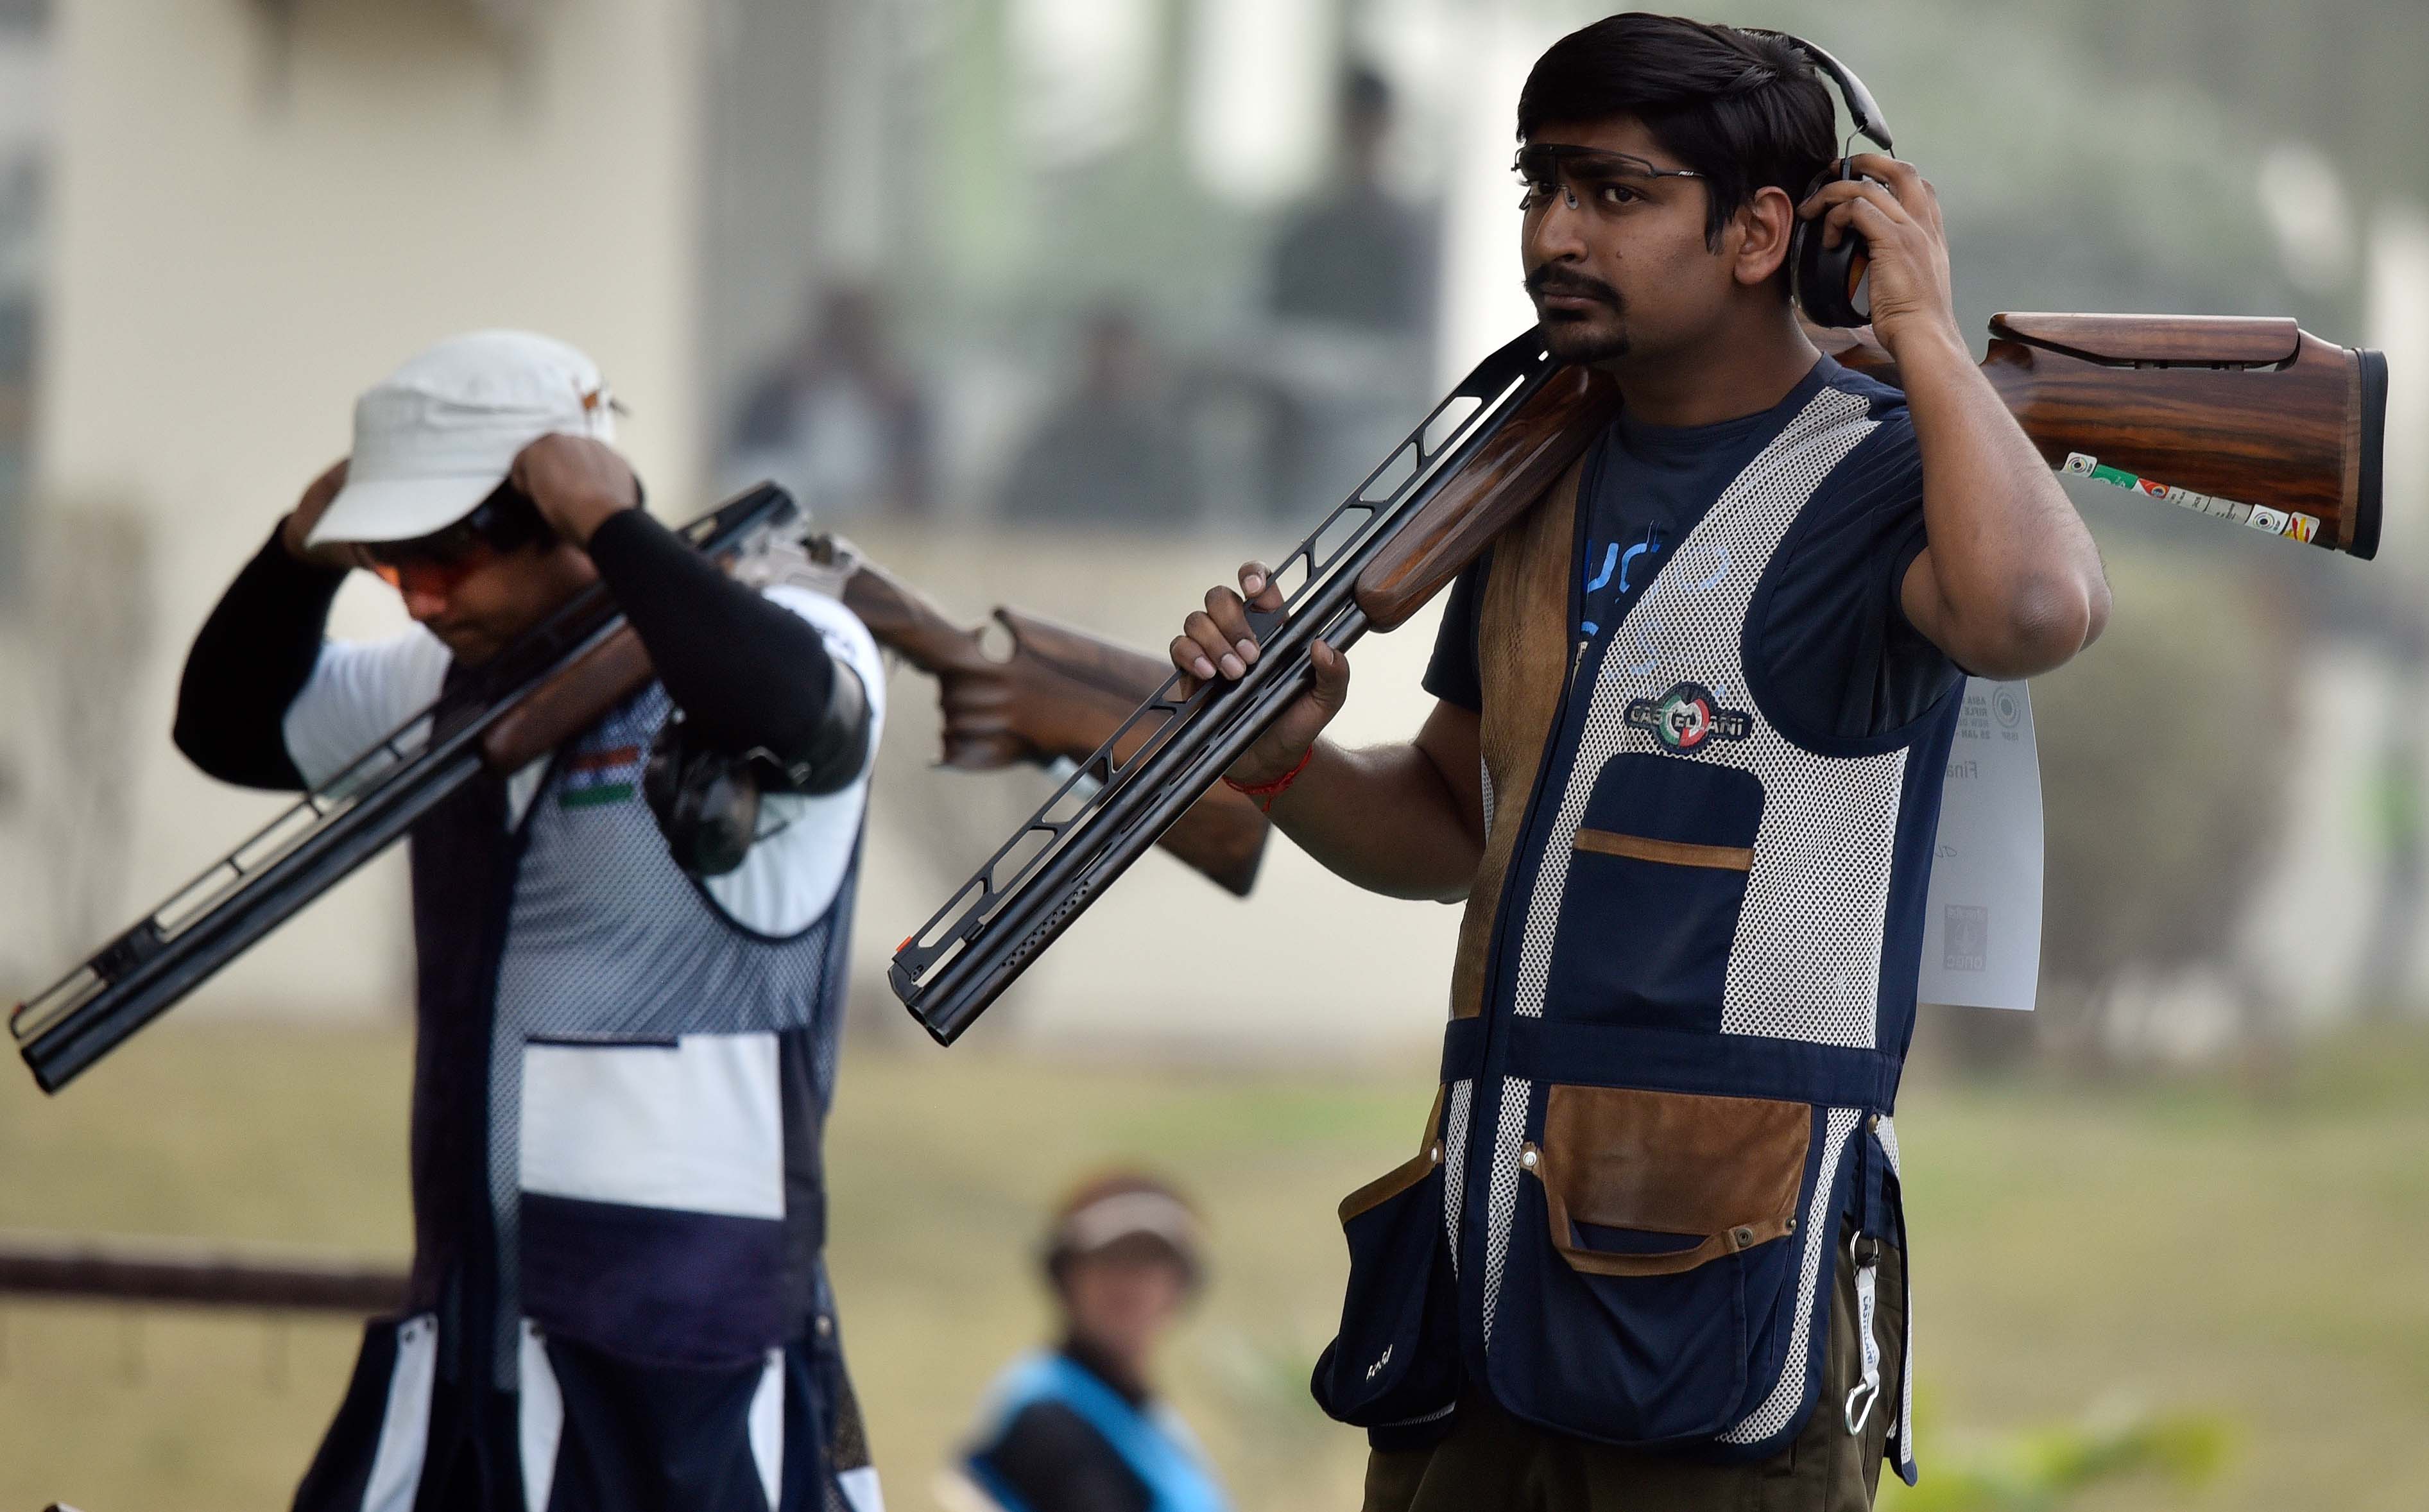 CWG 2018 | Ankur Mittal finishes third in Doubles Trap, wins bronze